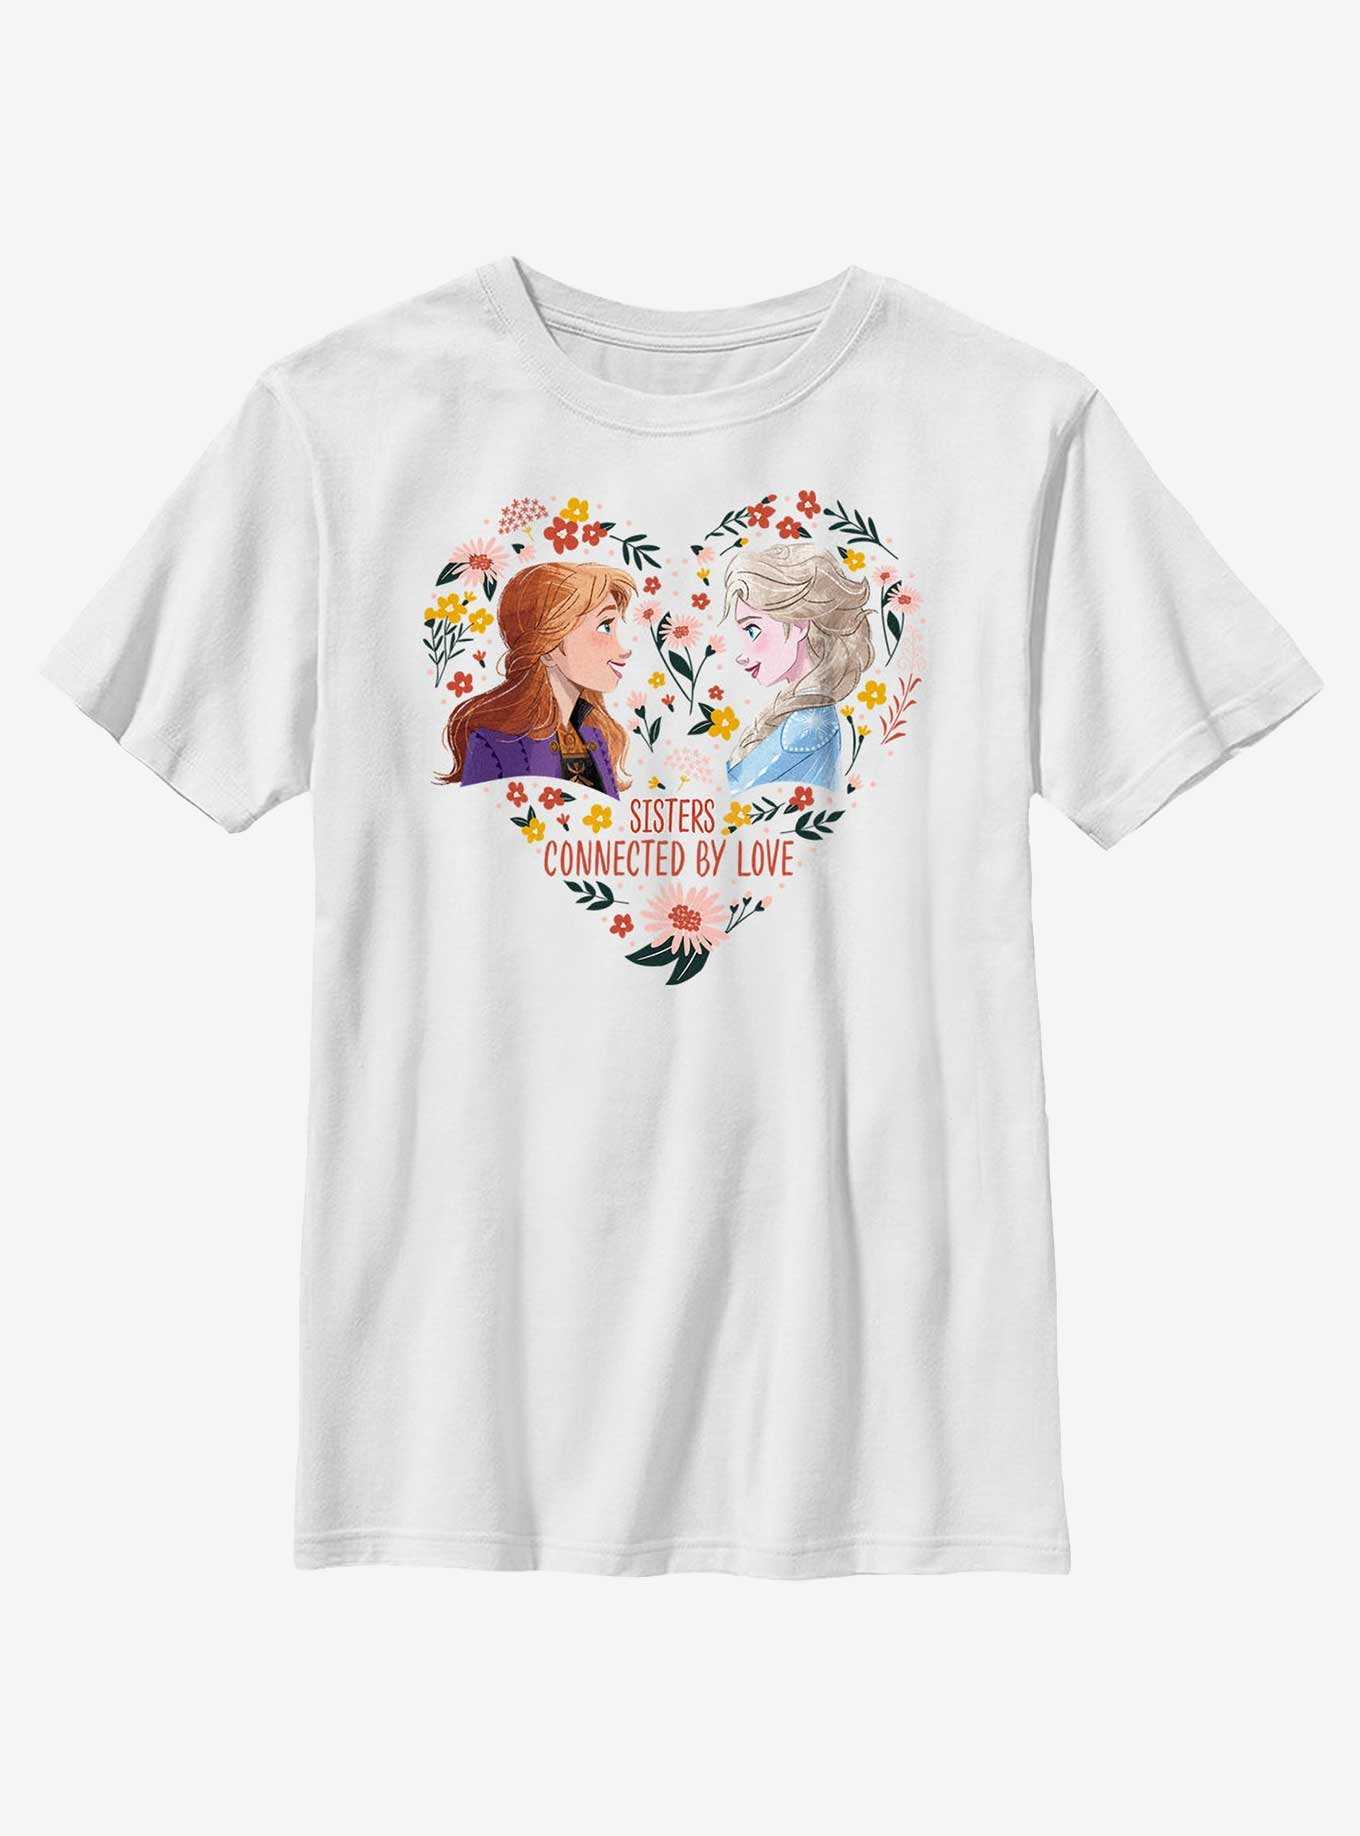 Disney Frozen Anna & Elsa Sisters Connected By Love Youth T-Shirt, , hi-res